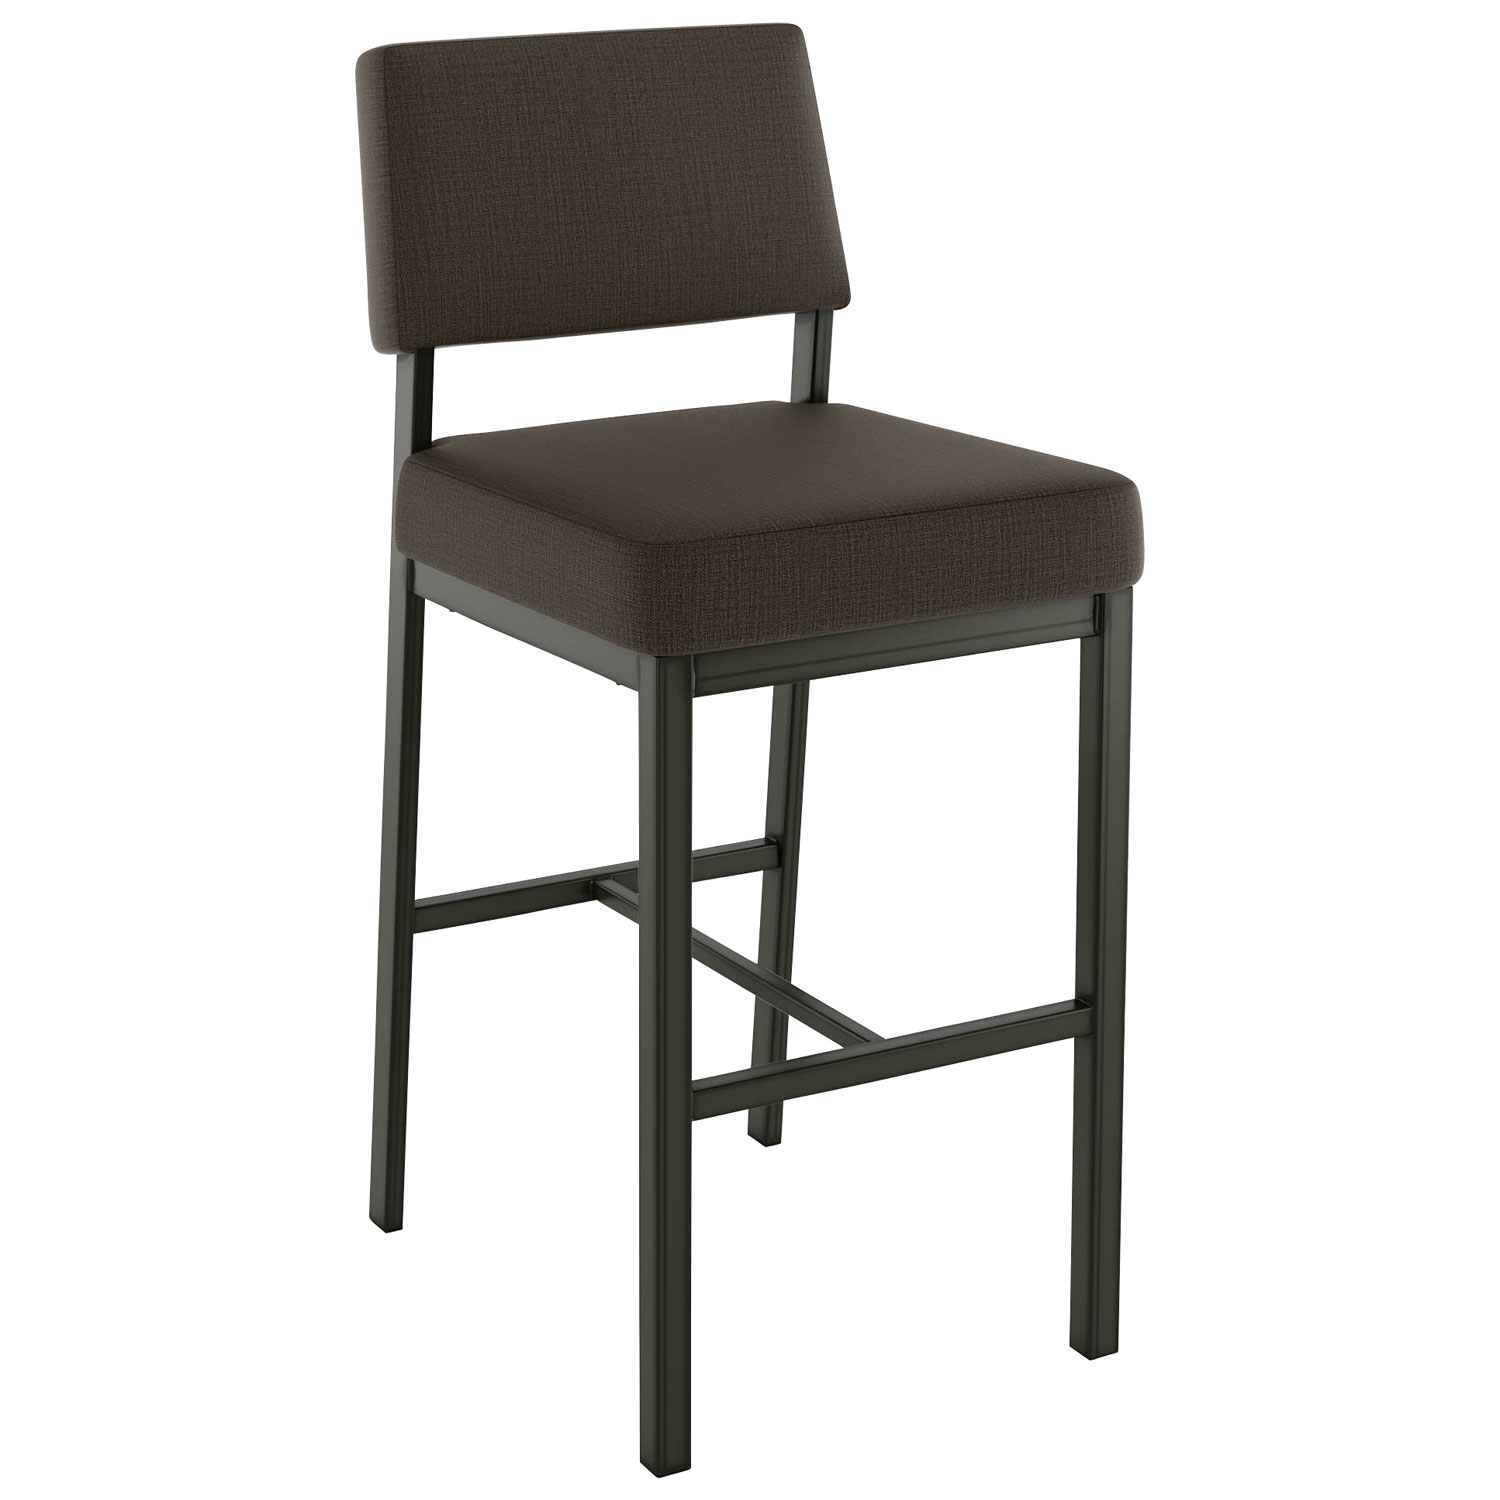 Avery Rustic Country Polyester Bar Height Barstool - Brown Grey/Grey